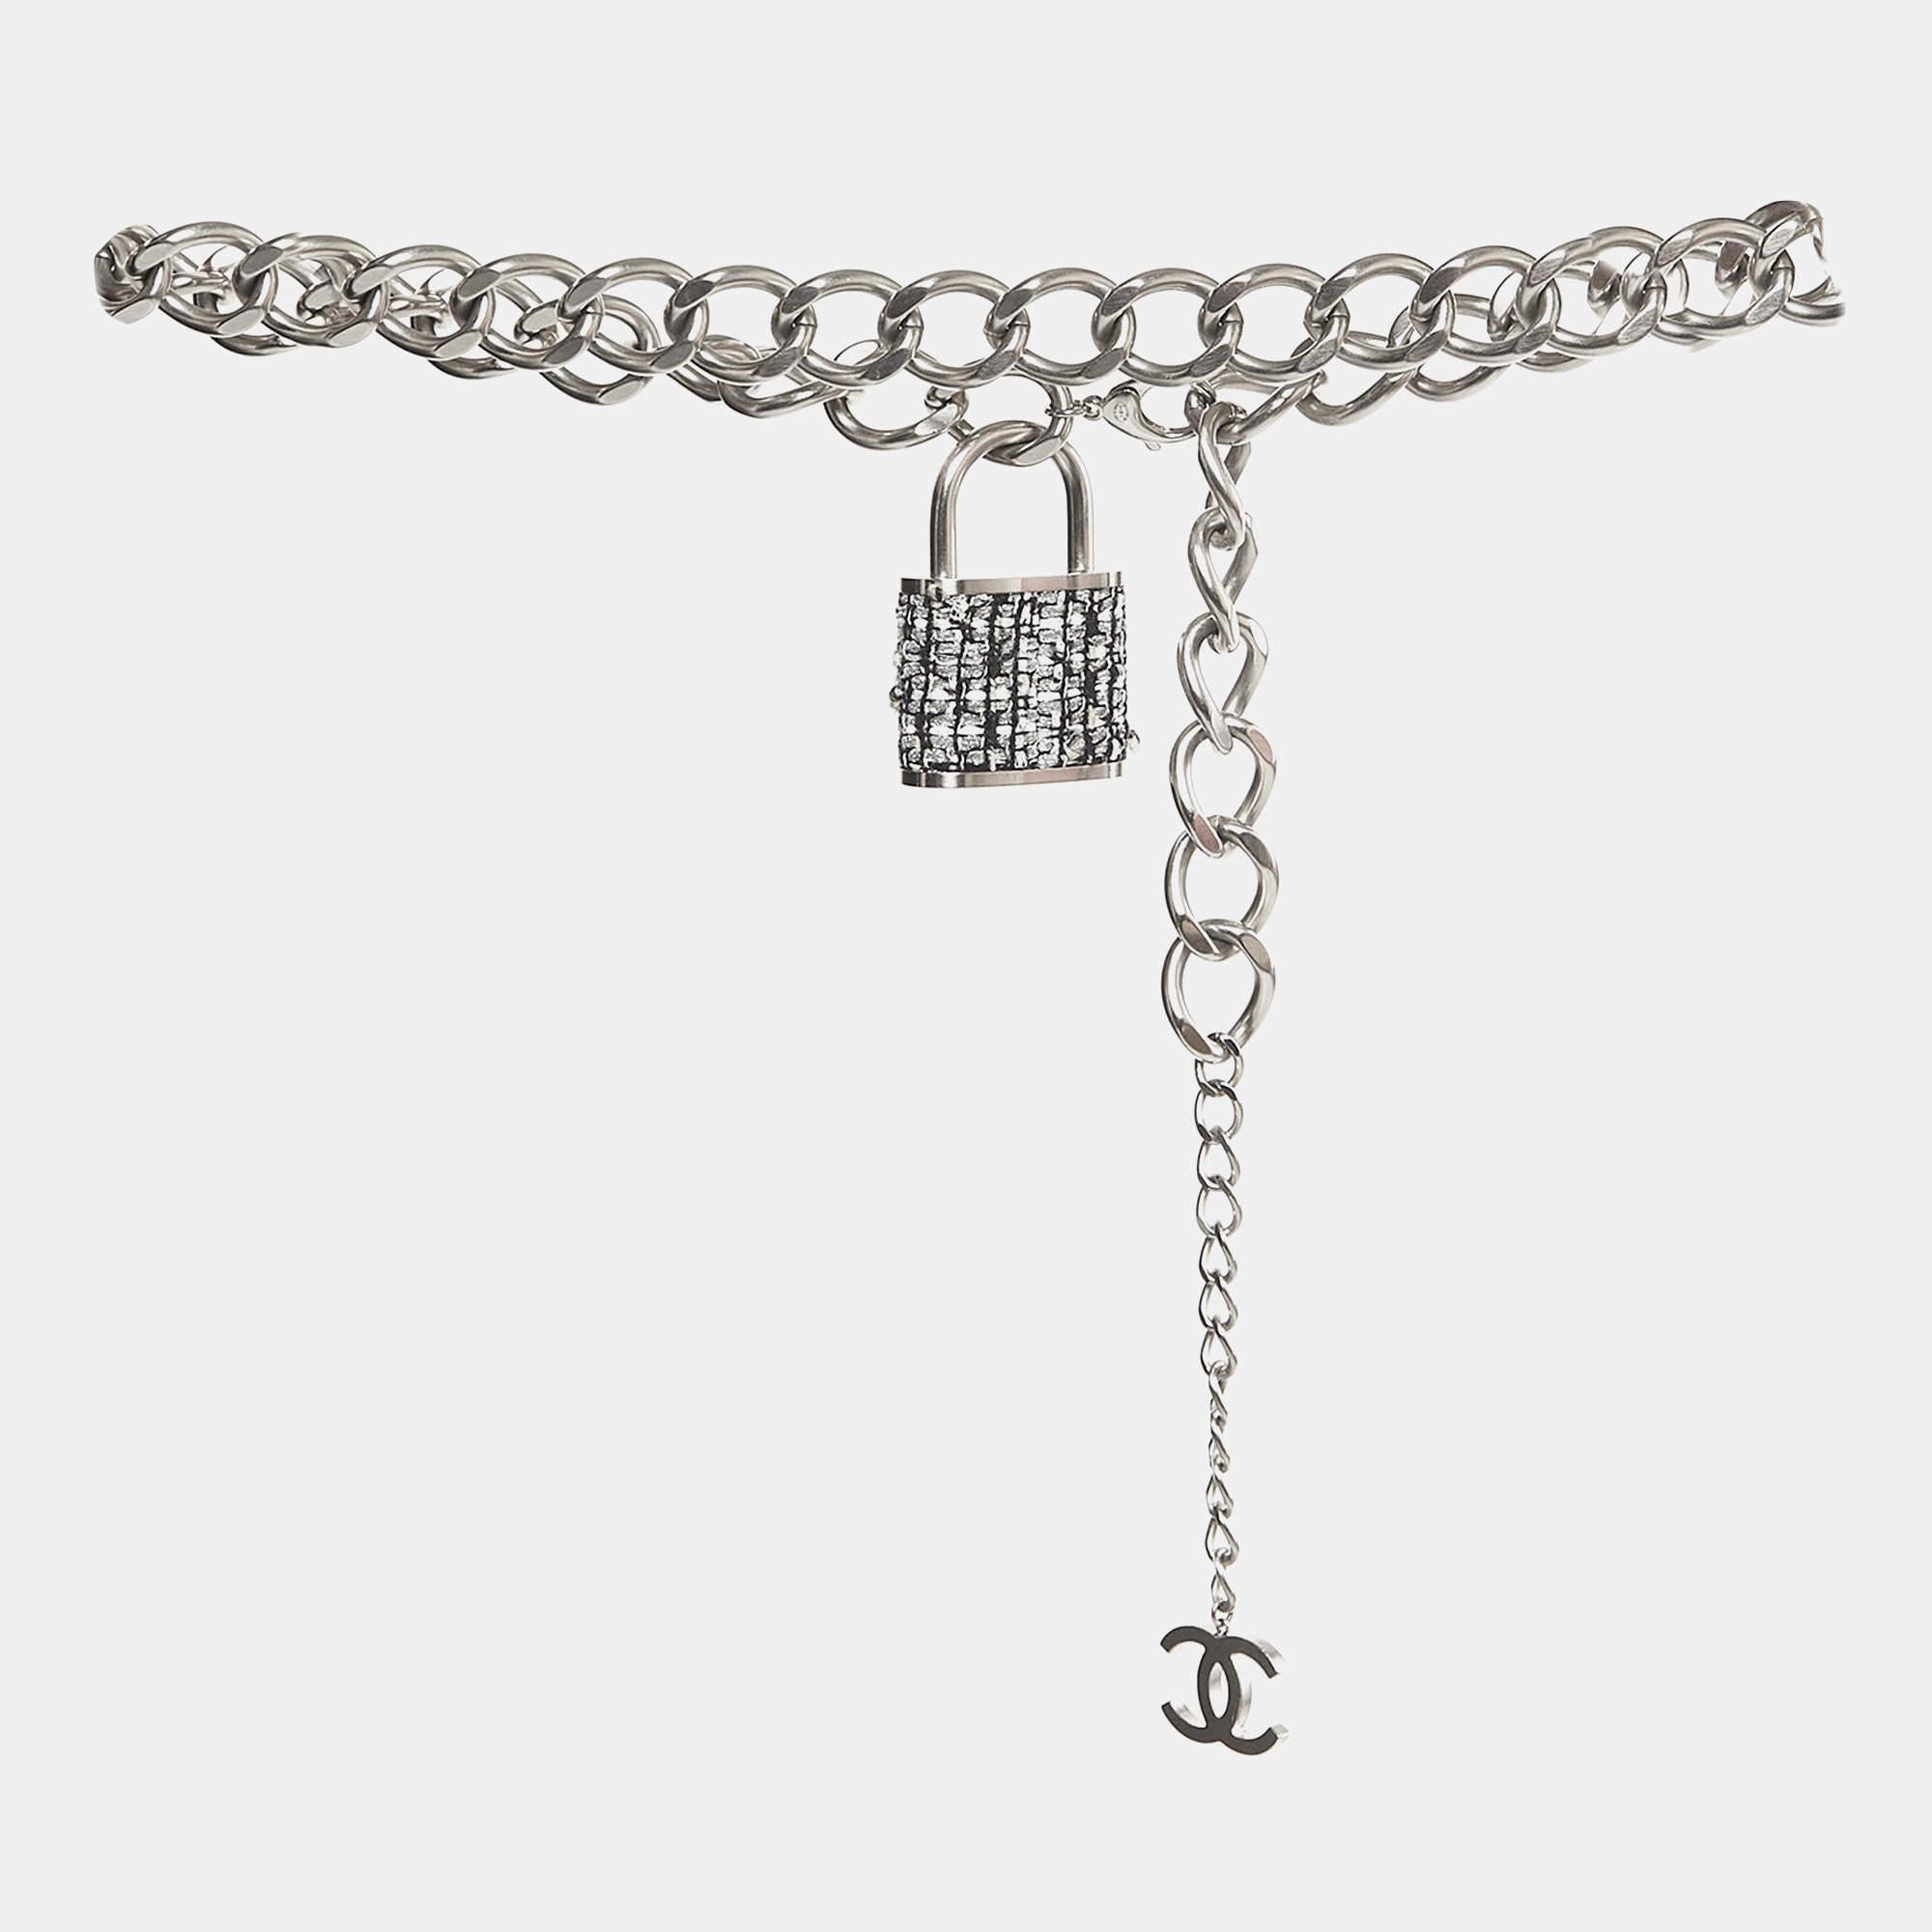 This waist belt from the House of Chanel will definitely elevate the look of your attire. It is created using silver-tone metal and is embellished with CC logo accents. Add this classy Chanel creation to your collection to create multiple